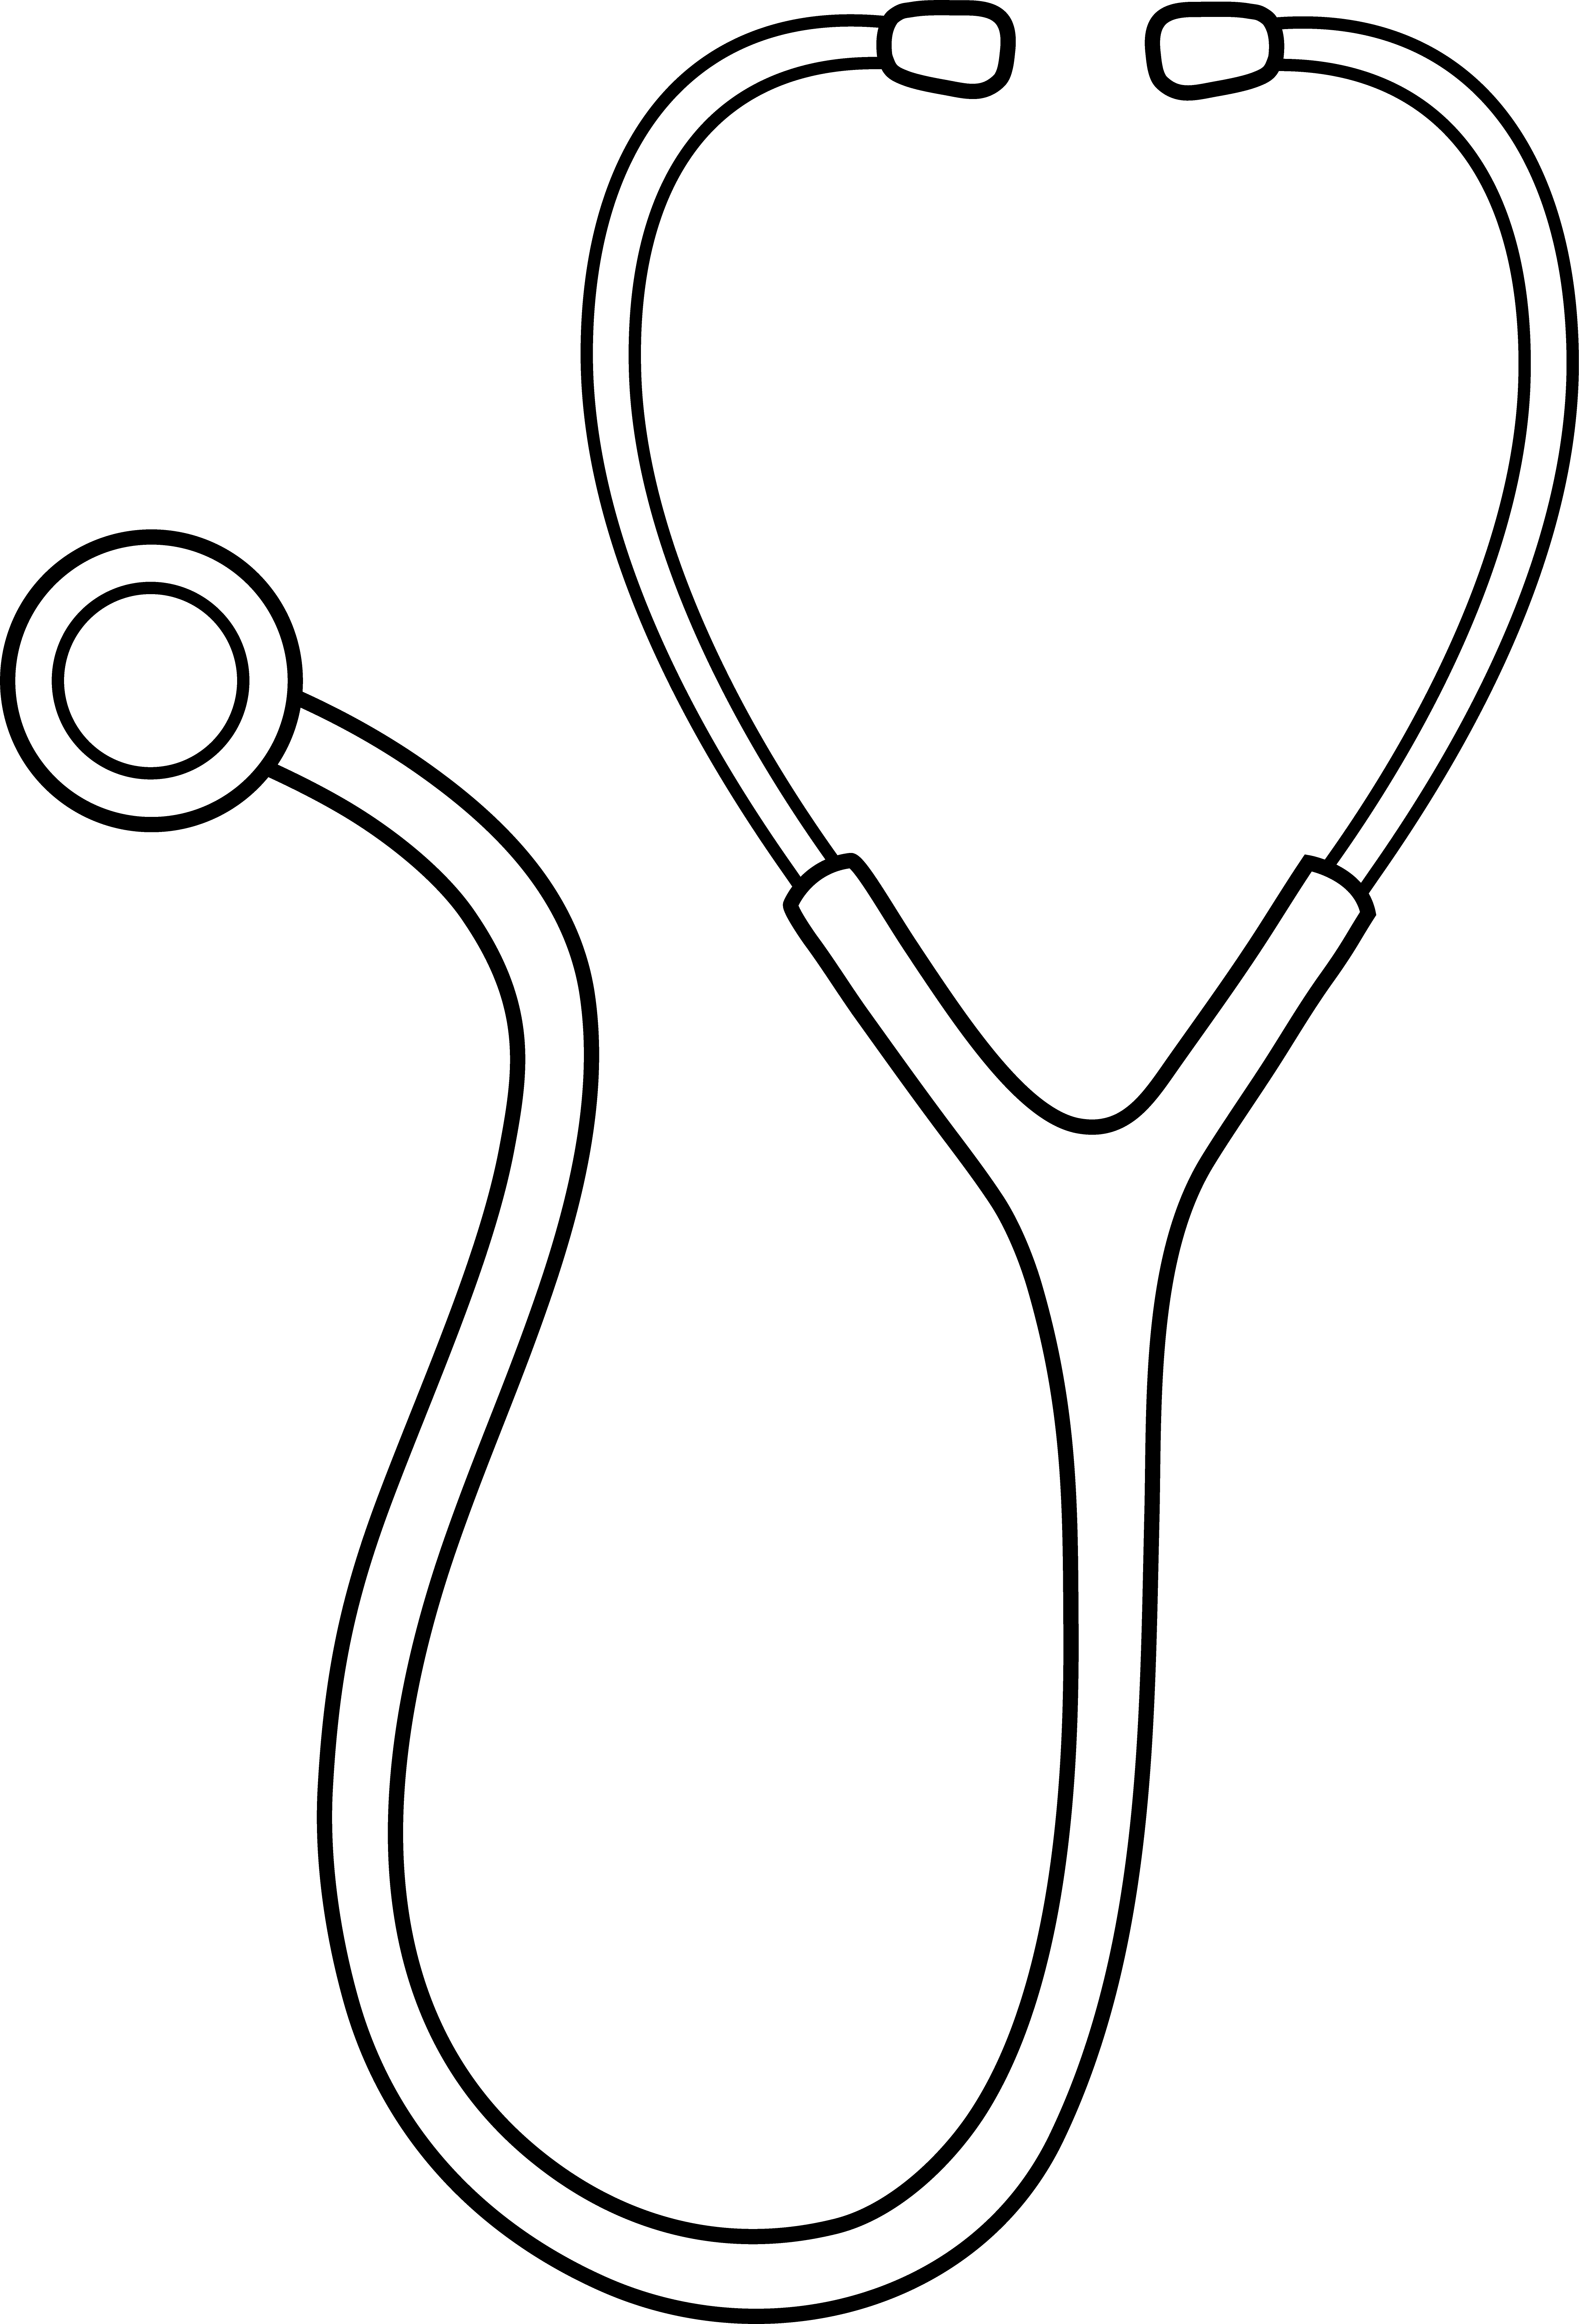 Veterinarian clipart black and white. Doctor panda free images